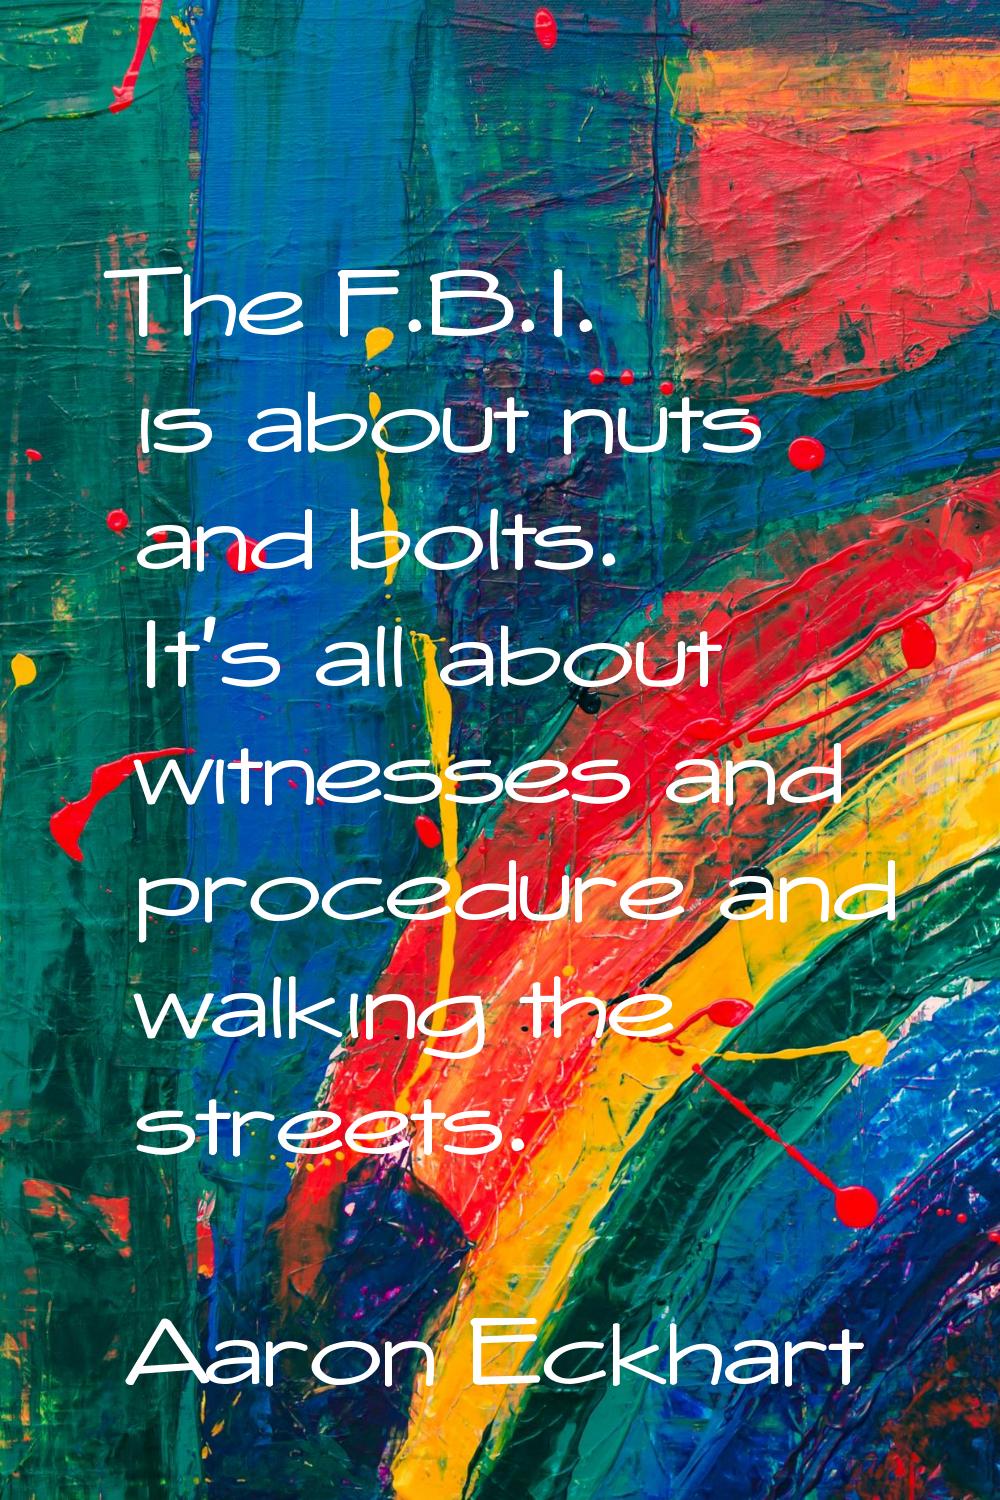 The F.B.I. is about nuts and bolts. It's all about witnesses and procedure and walking the streets.